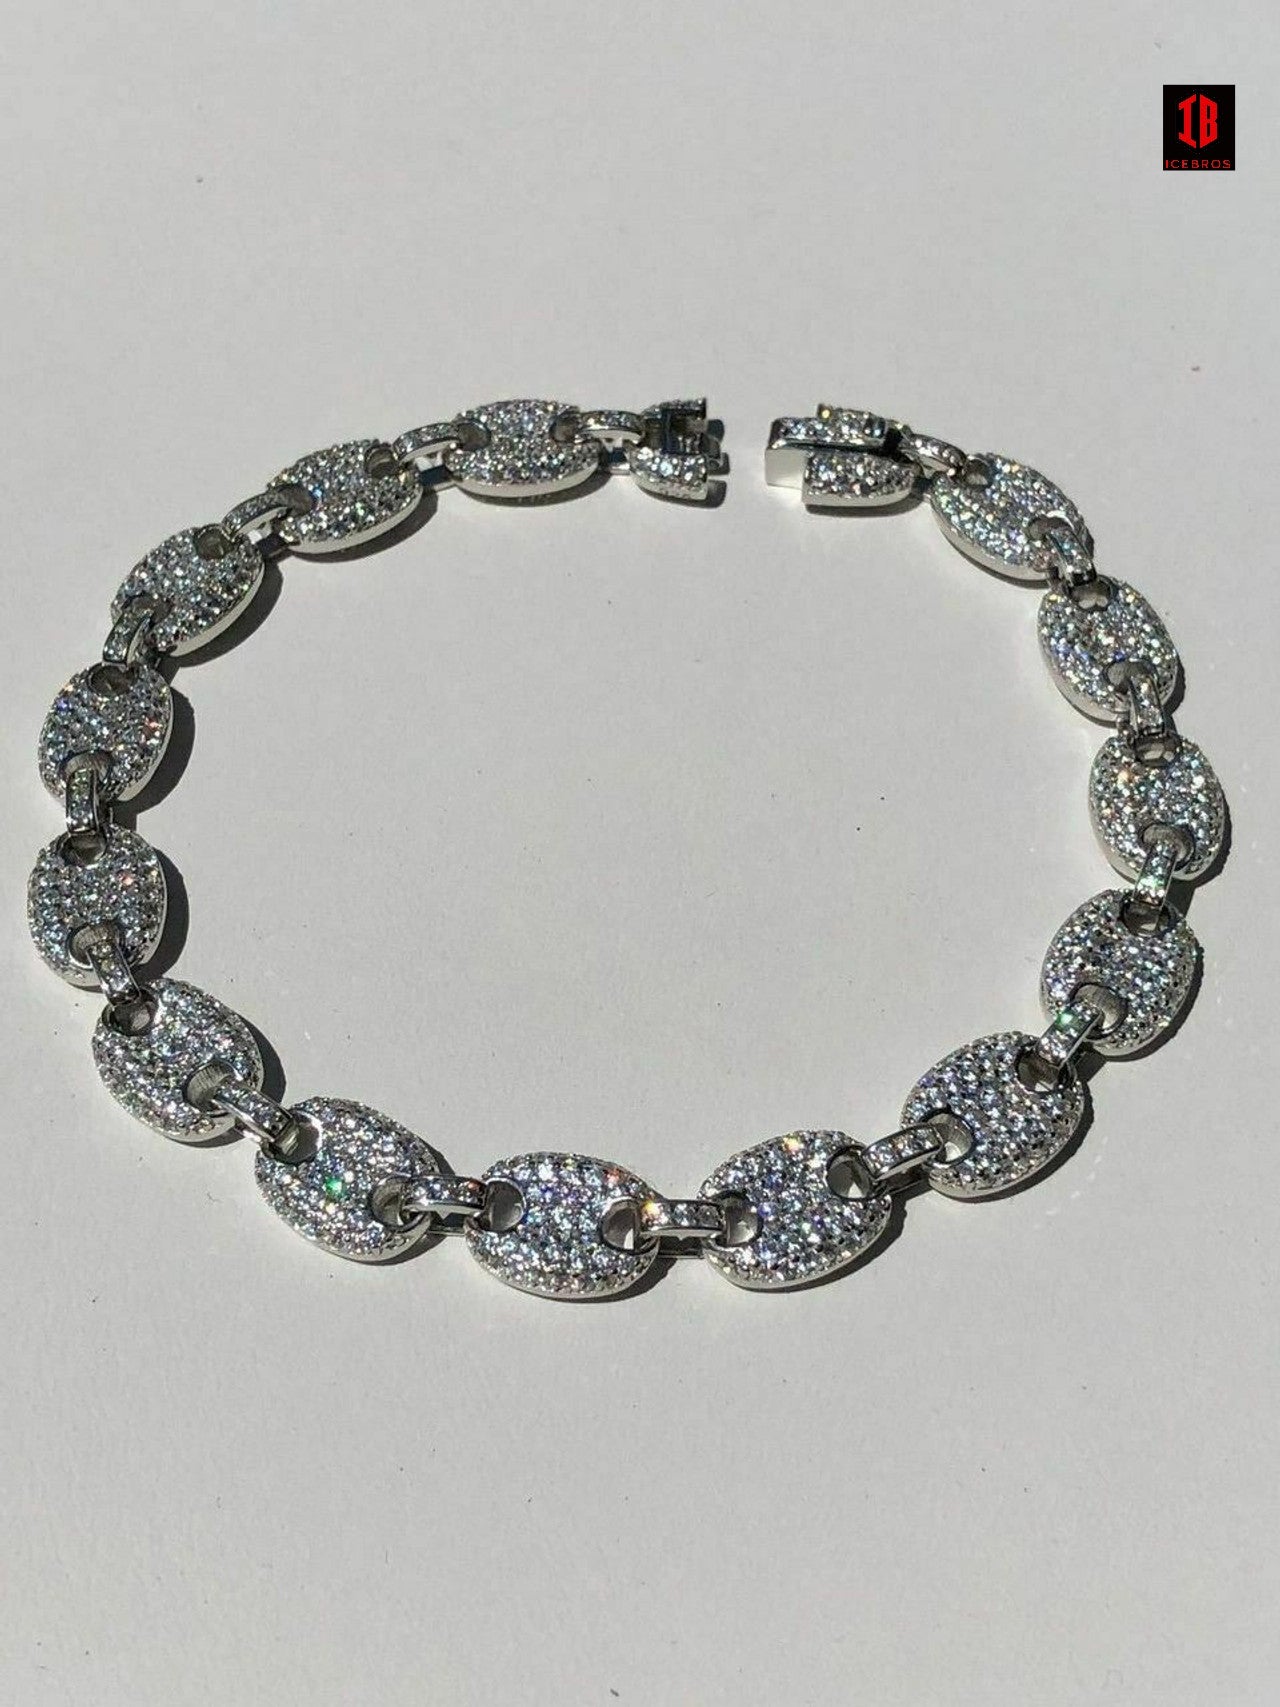 Men's Women's 8mm Gucci Link Bracelet Solid 925 Sterling Silver 5ct Diamond ICY 8mm,10mm,12mm